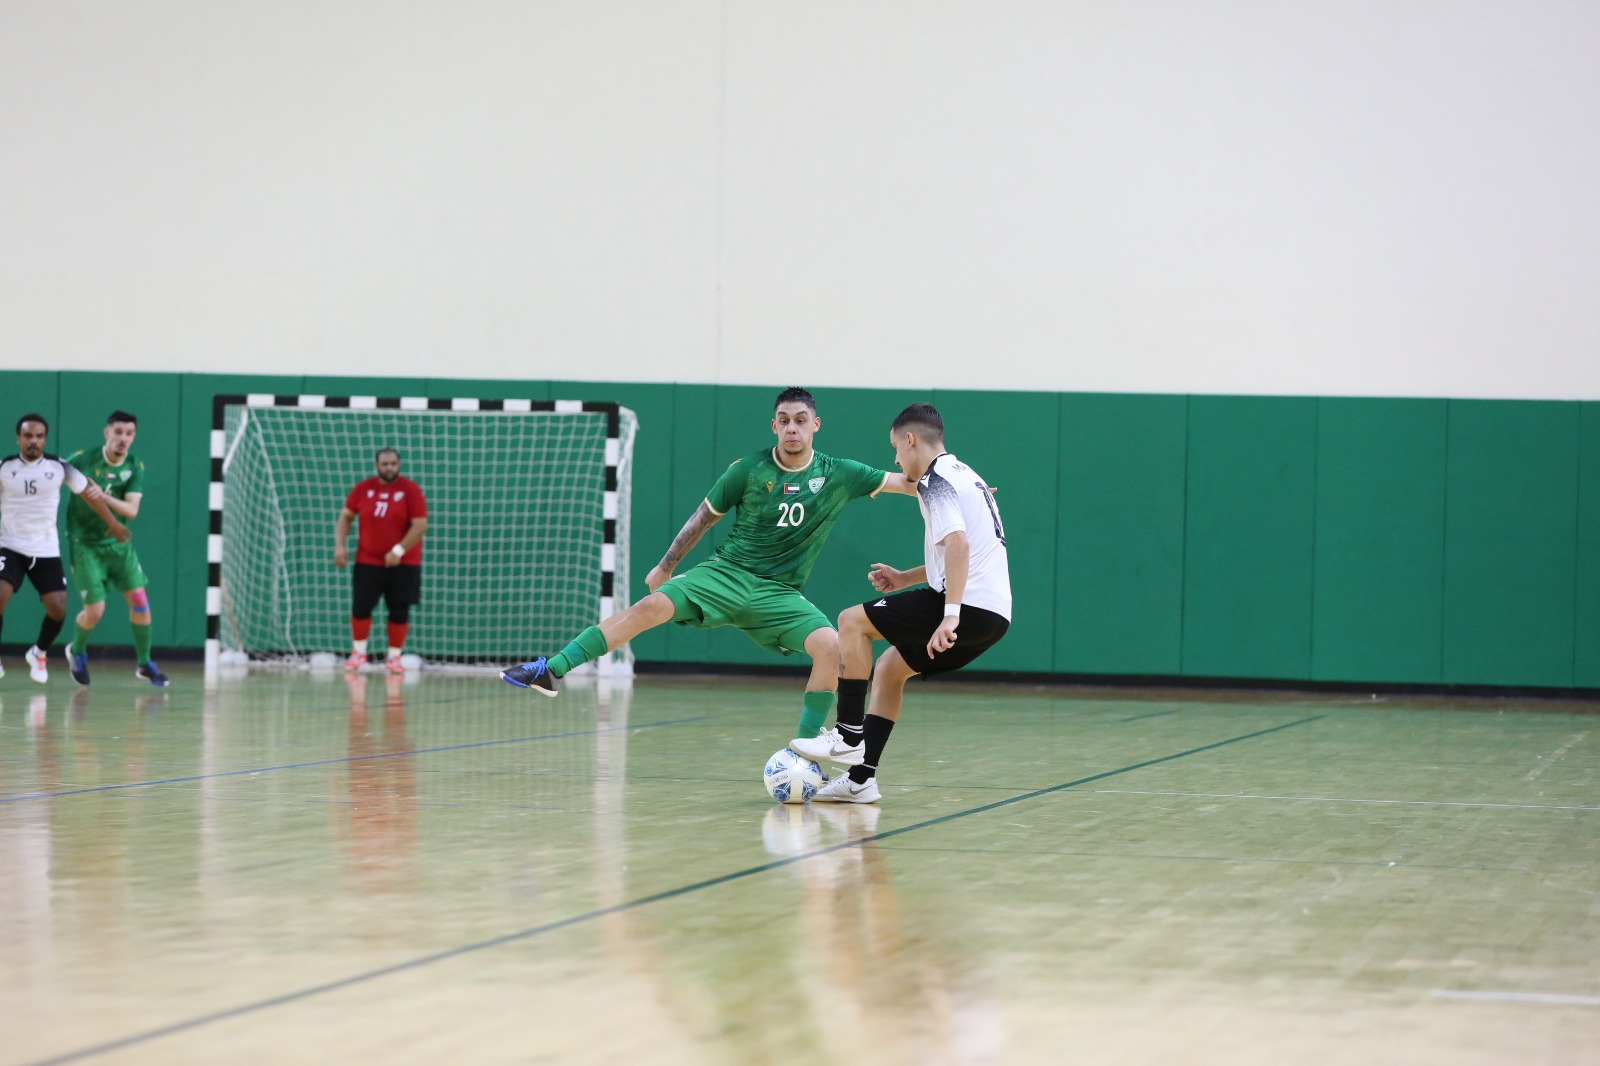 Khorfakkan qualified for the Futsal Cup final